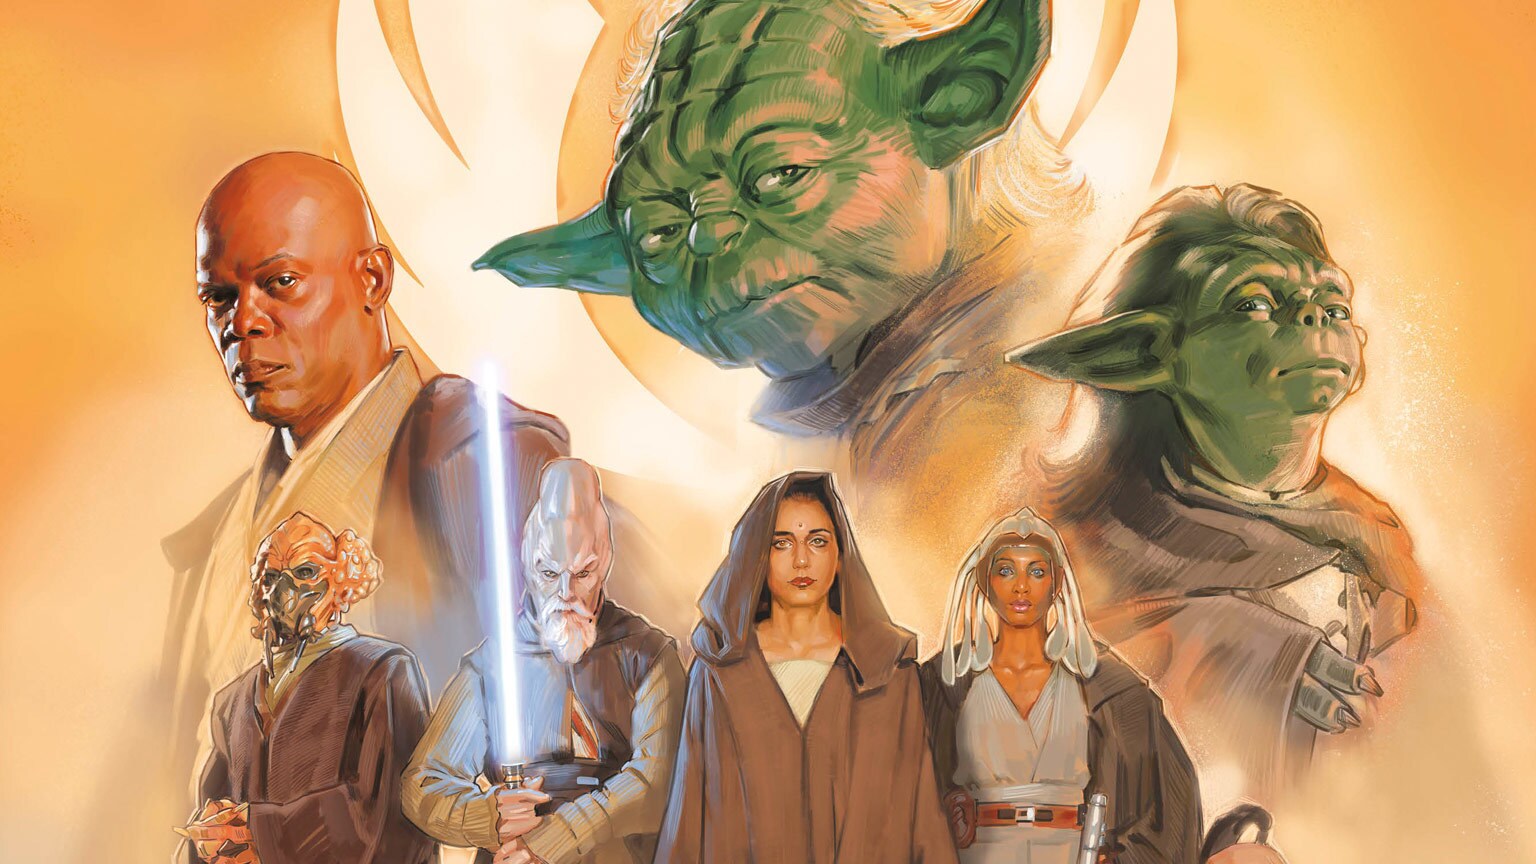 The Jedi Council Debates Its Future in Star Wars: The Living Force - Exclusive Excerpt